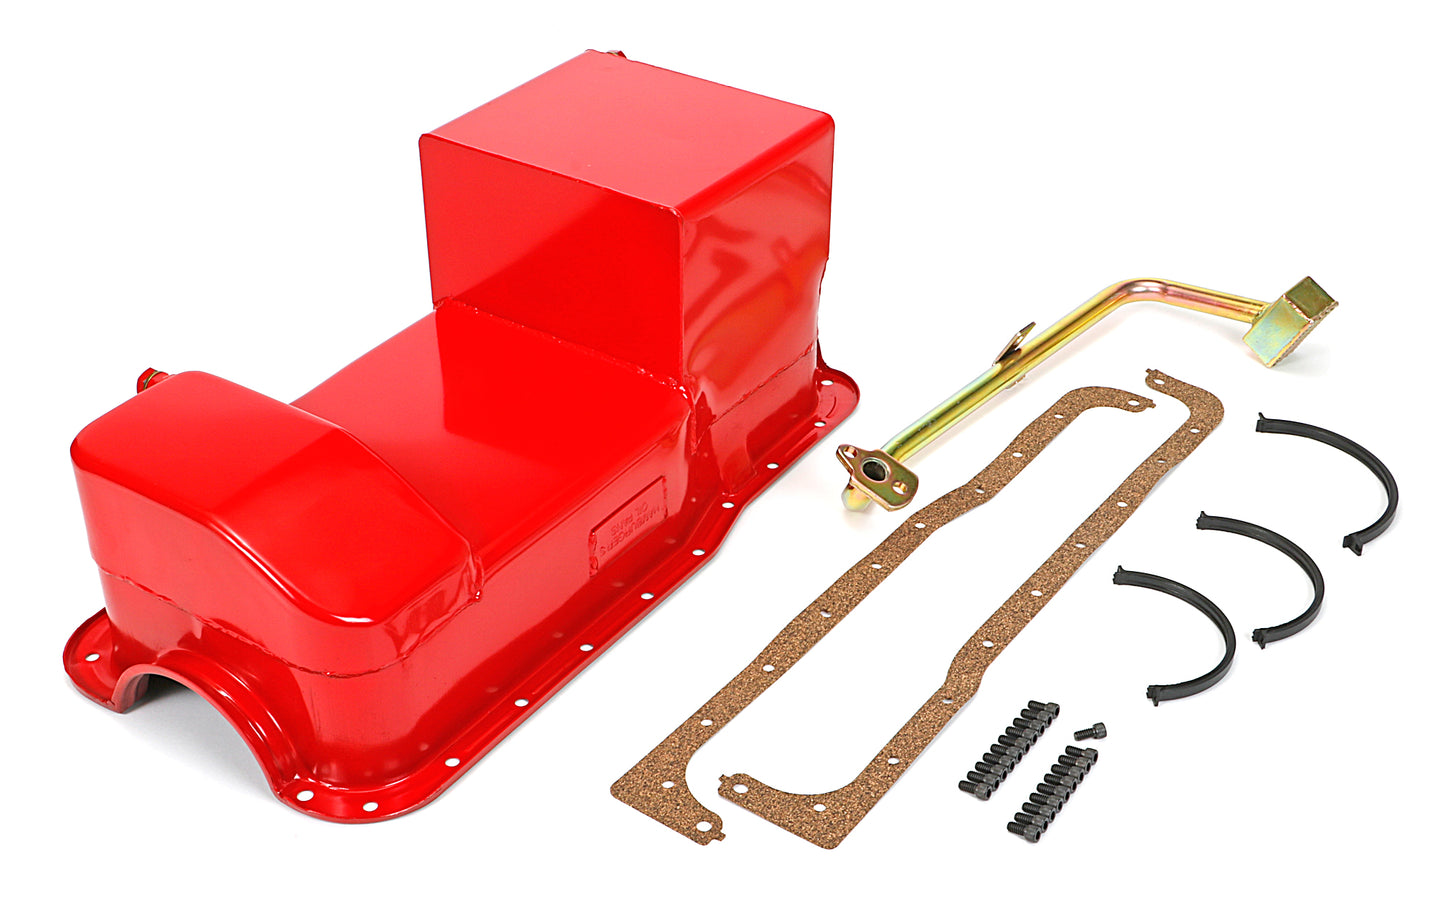 HAMBURGER'S PERFORMANCE PRODUCTS ECONO-SERIES OIL PAN; FORD (351W) 1979 OR LATER- ROAD RACING; 7 QTS.; WET SUMP 3090